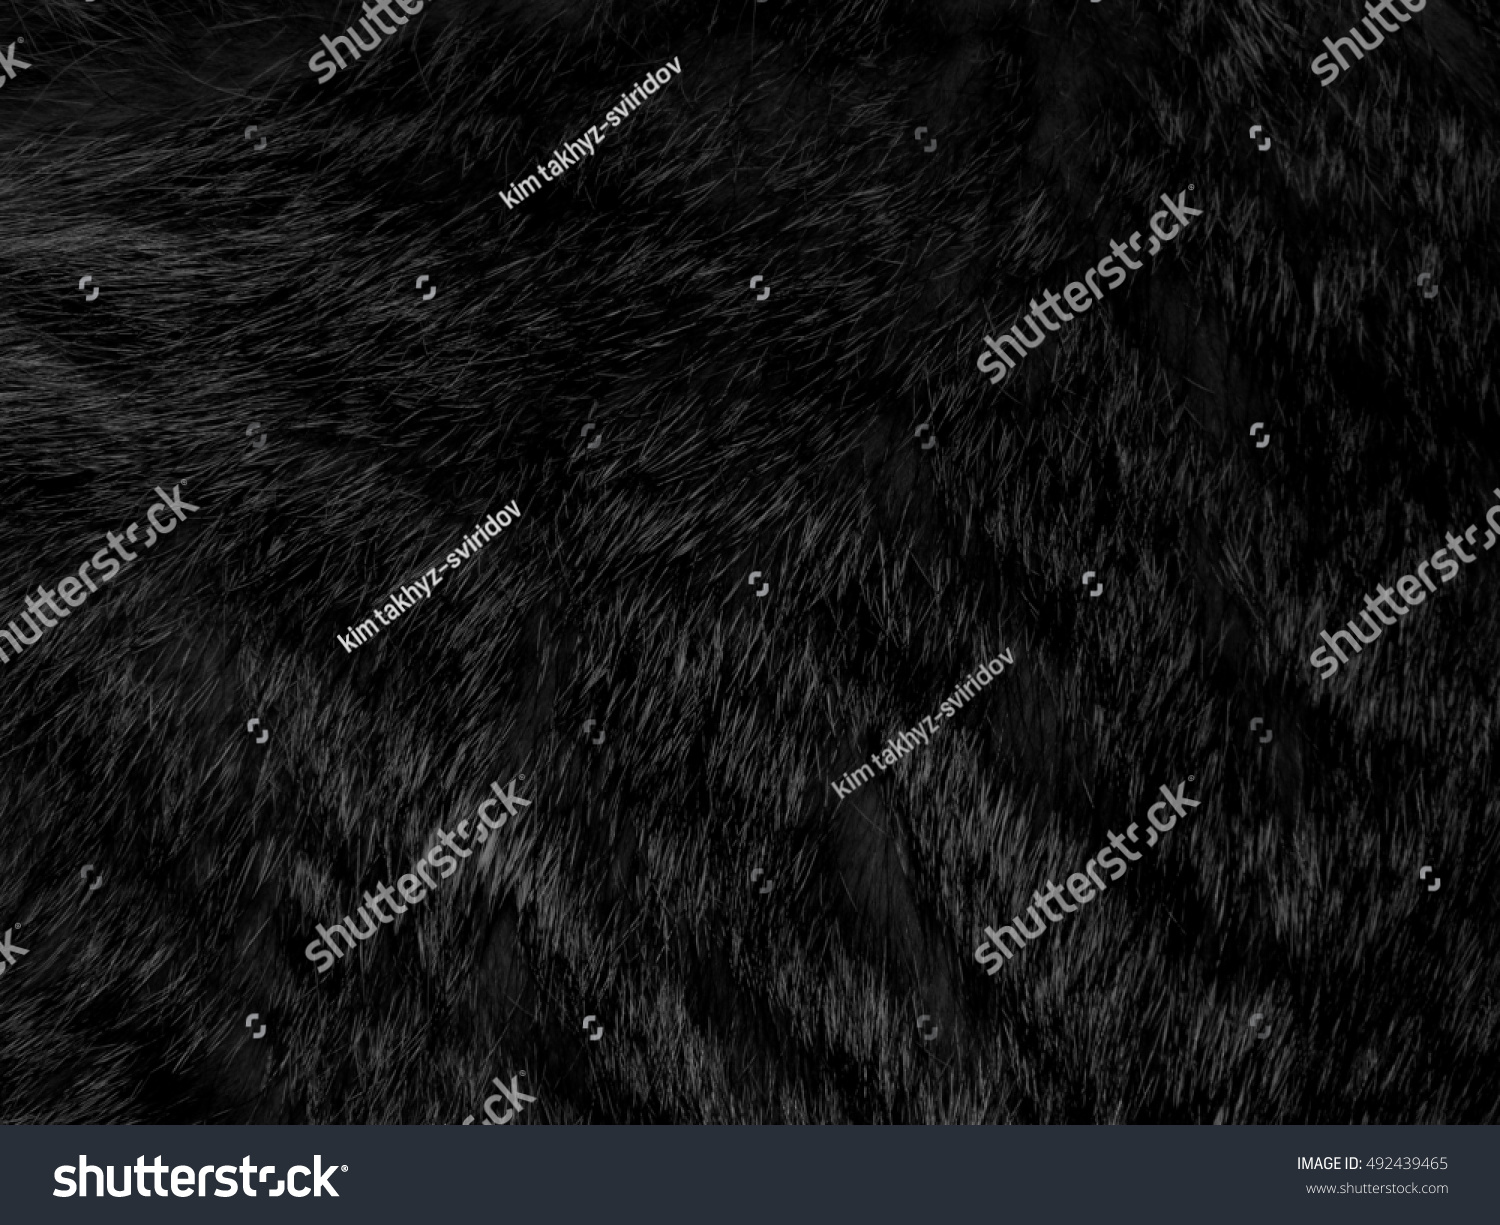 Natural fur of an animal on black and white photography #492439465